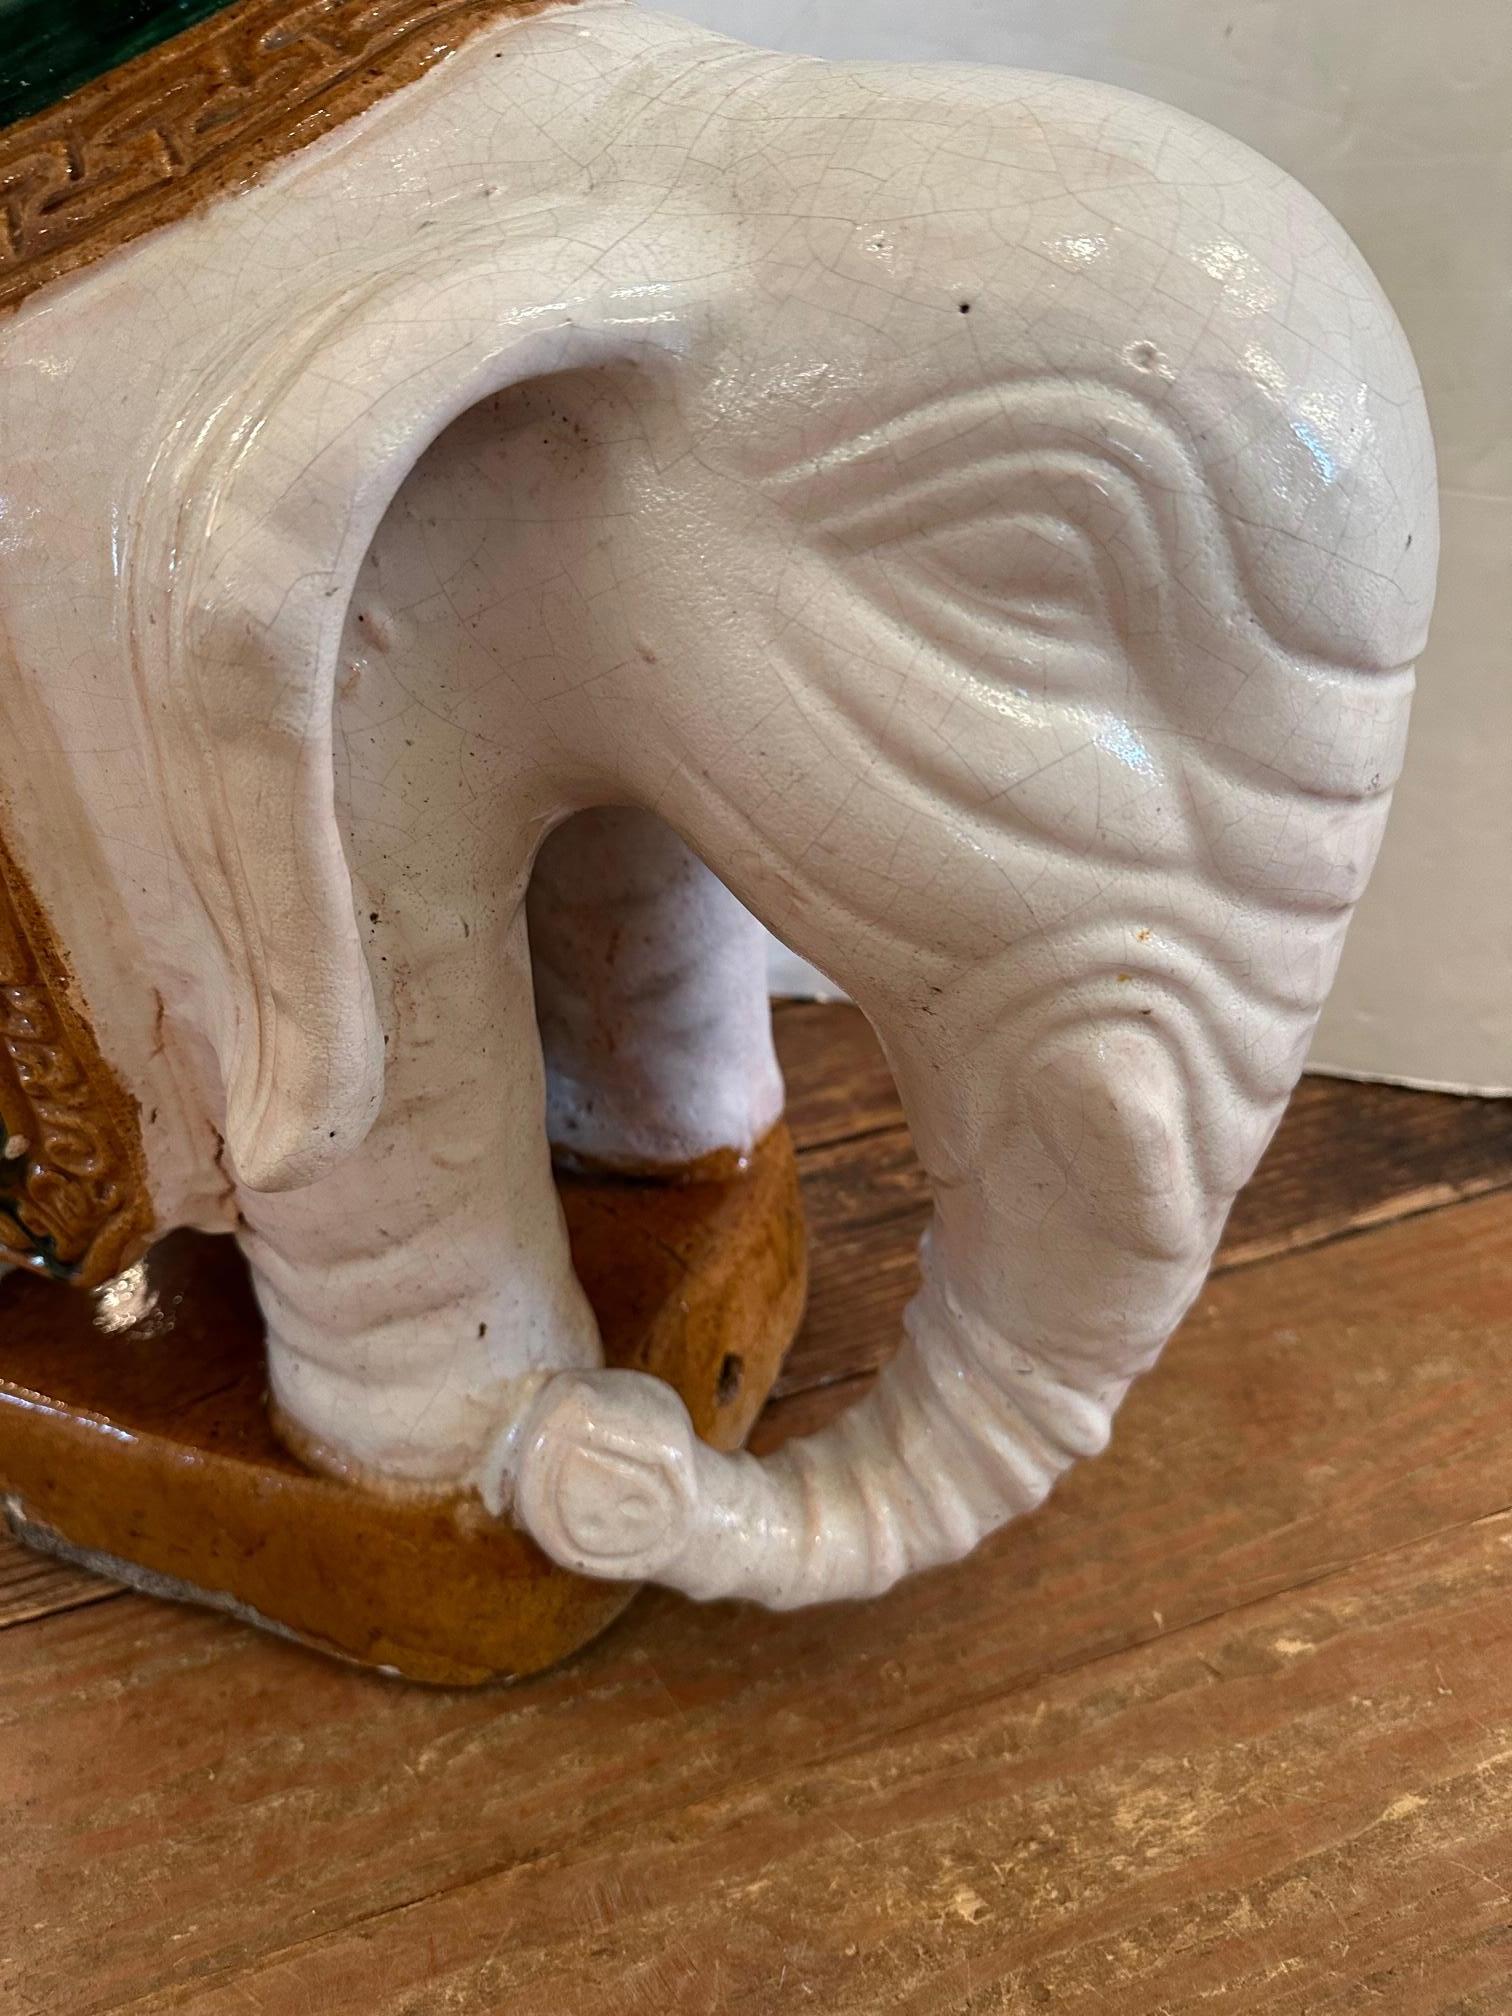 Vintage painted stoneware end table Chinese garden seat in the shape of an elephant having octagonal top surface. Nice earth colors including gold and green adornments on a creamy white elephant. Some losses here and there that don't effect overall